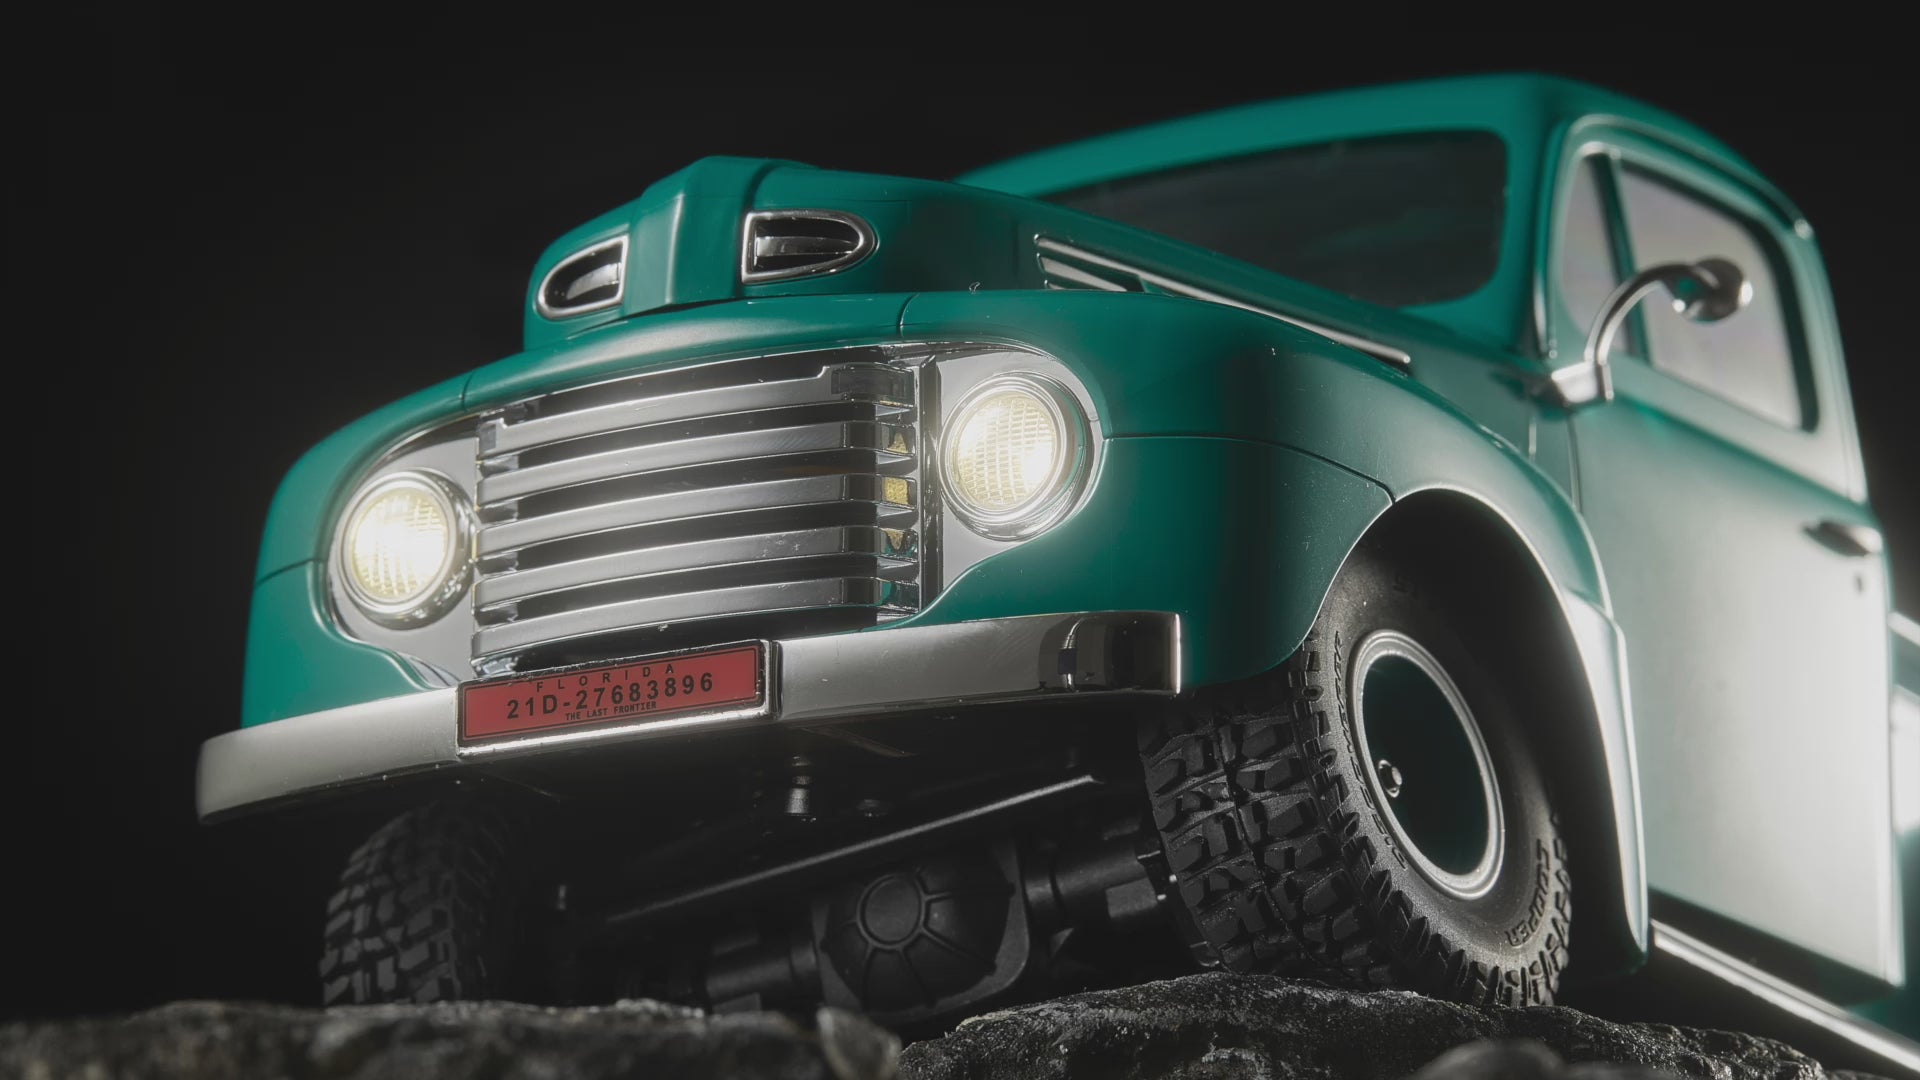 ROCHOBBY 1:18 Magnum Off-Road Truck RTR Green